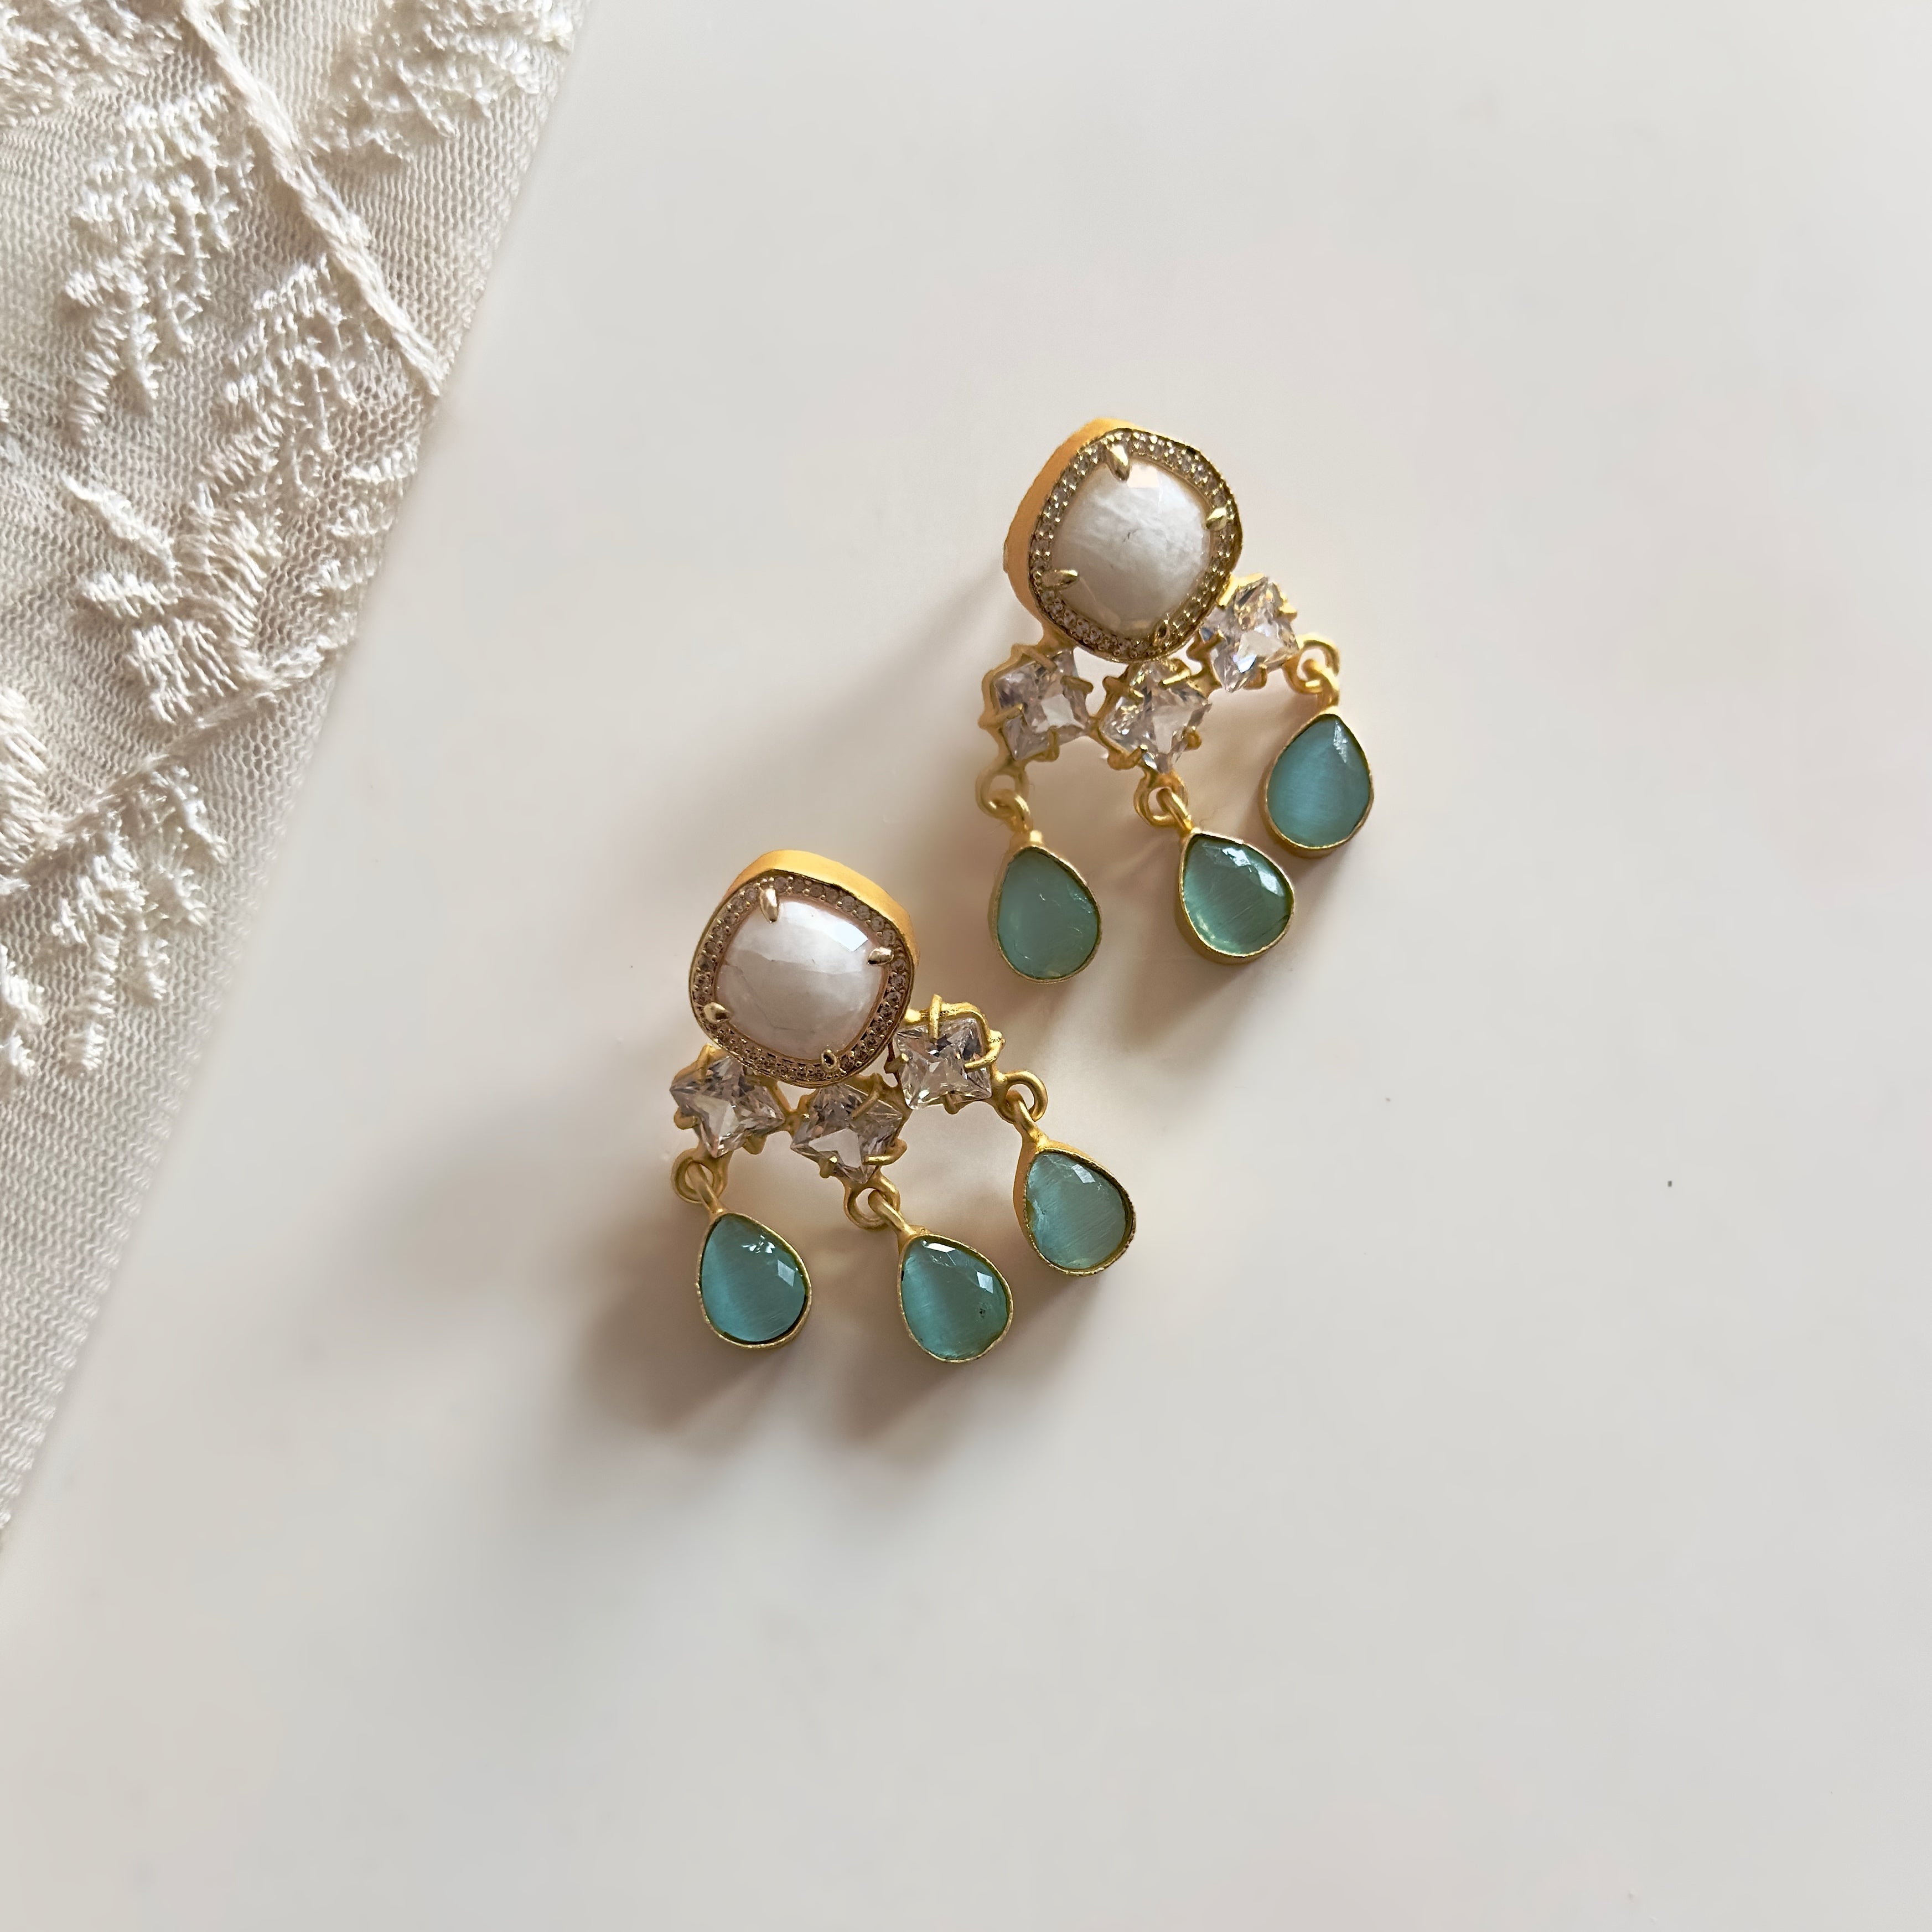 Elevate your look with the Lorená Mint Drop Earrings. The white and mint hues add a refreshing touch, while the sparkling cz crystals add a touch of elegance. Perfect for any occasion, these earrings are sure to make a statement and turn heads.